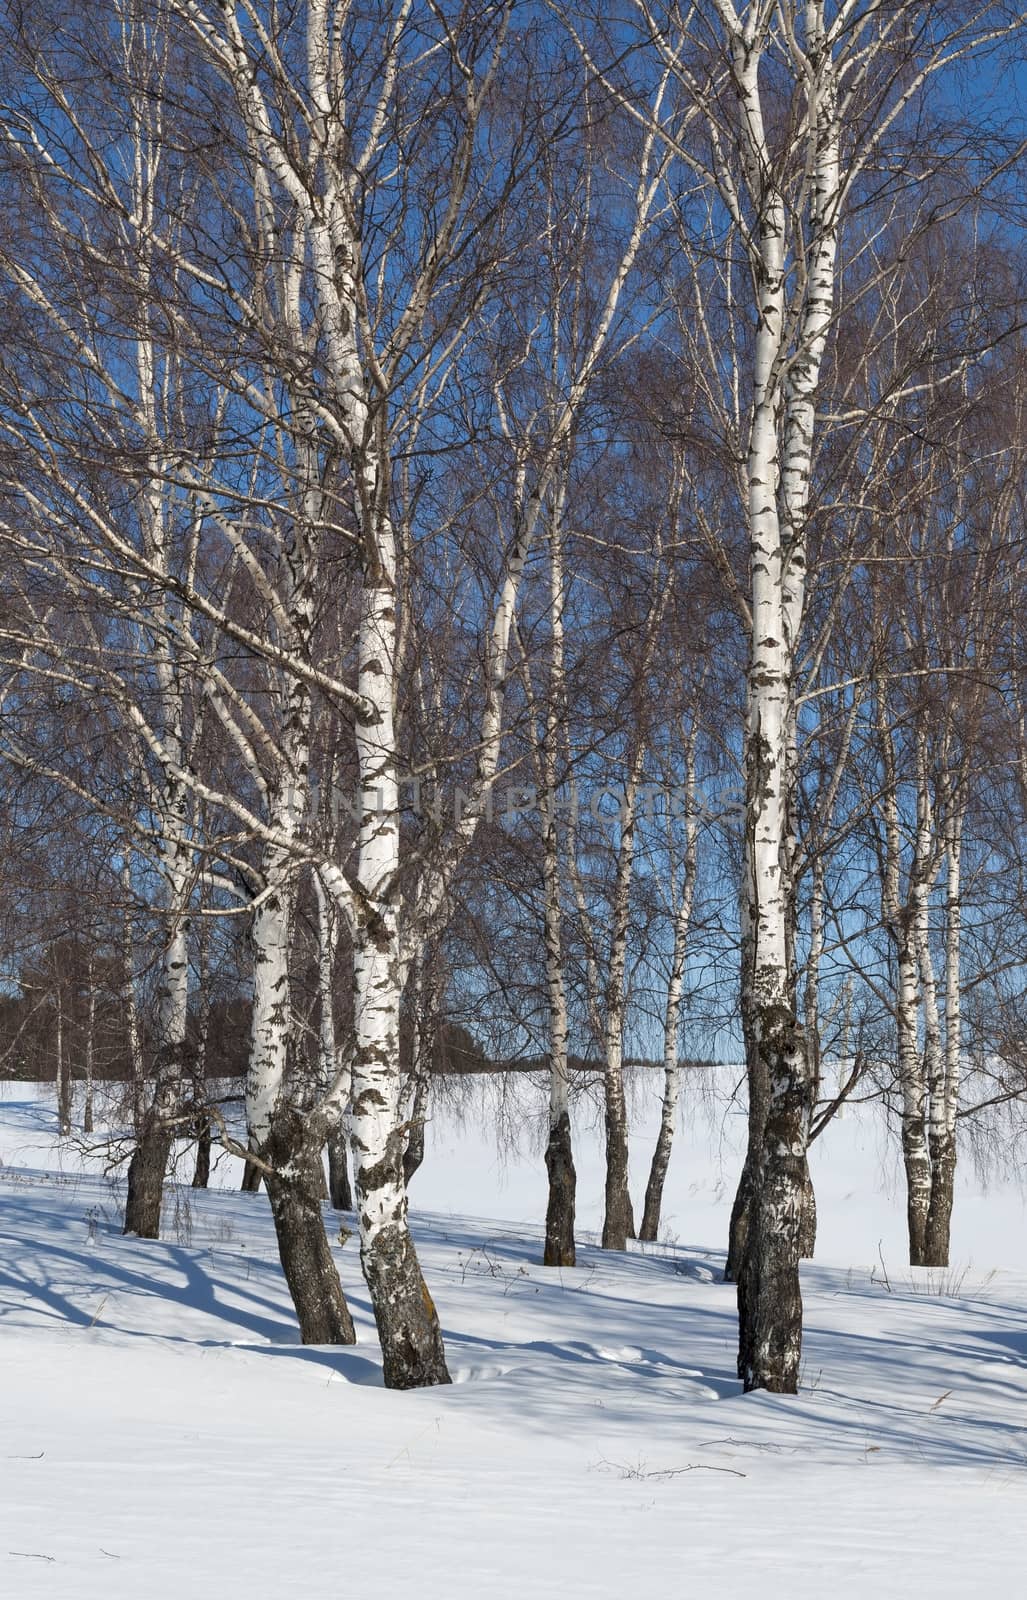 Birches group in early spring by wander